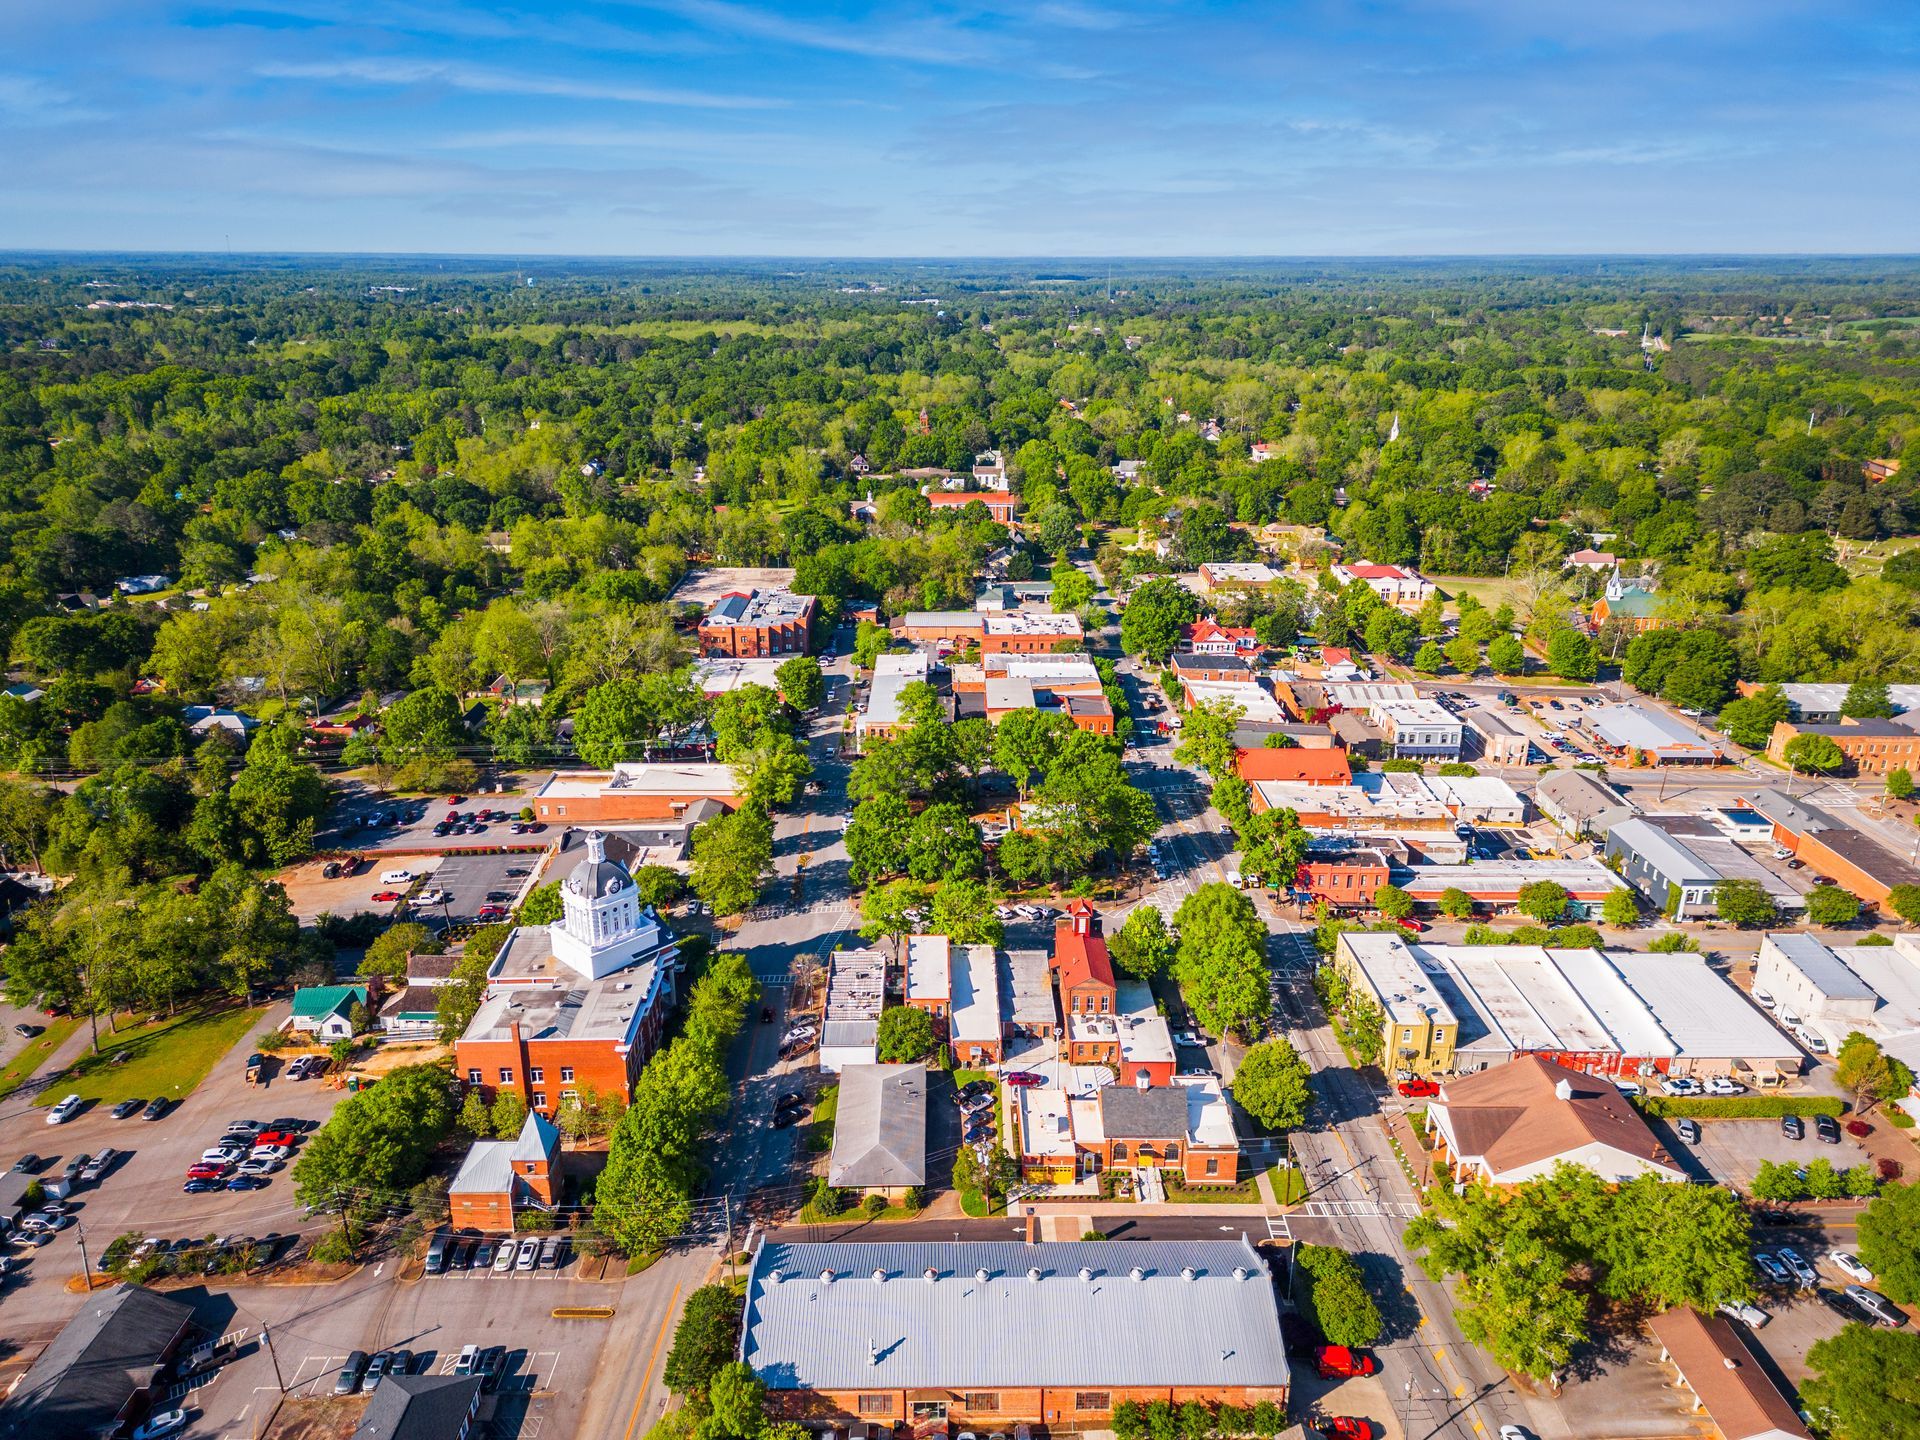 an aerial view of a small town surrounded by trees and buildings .